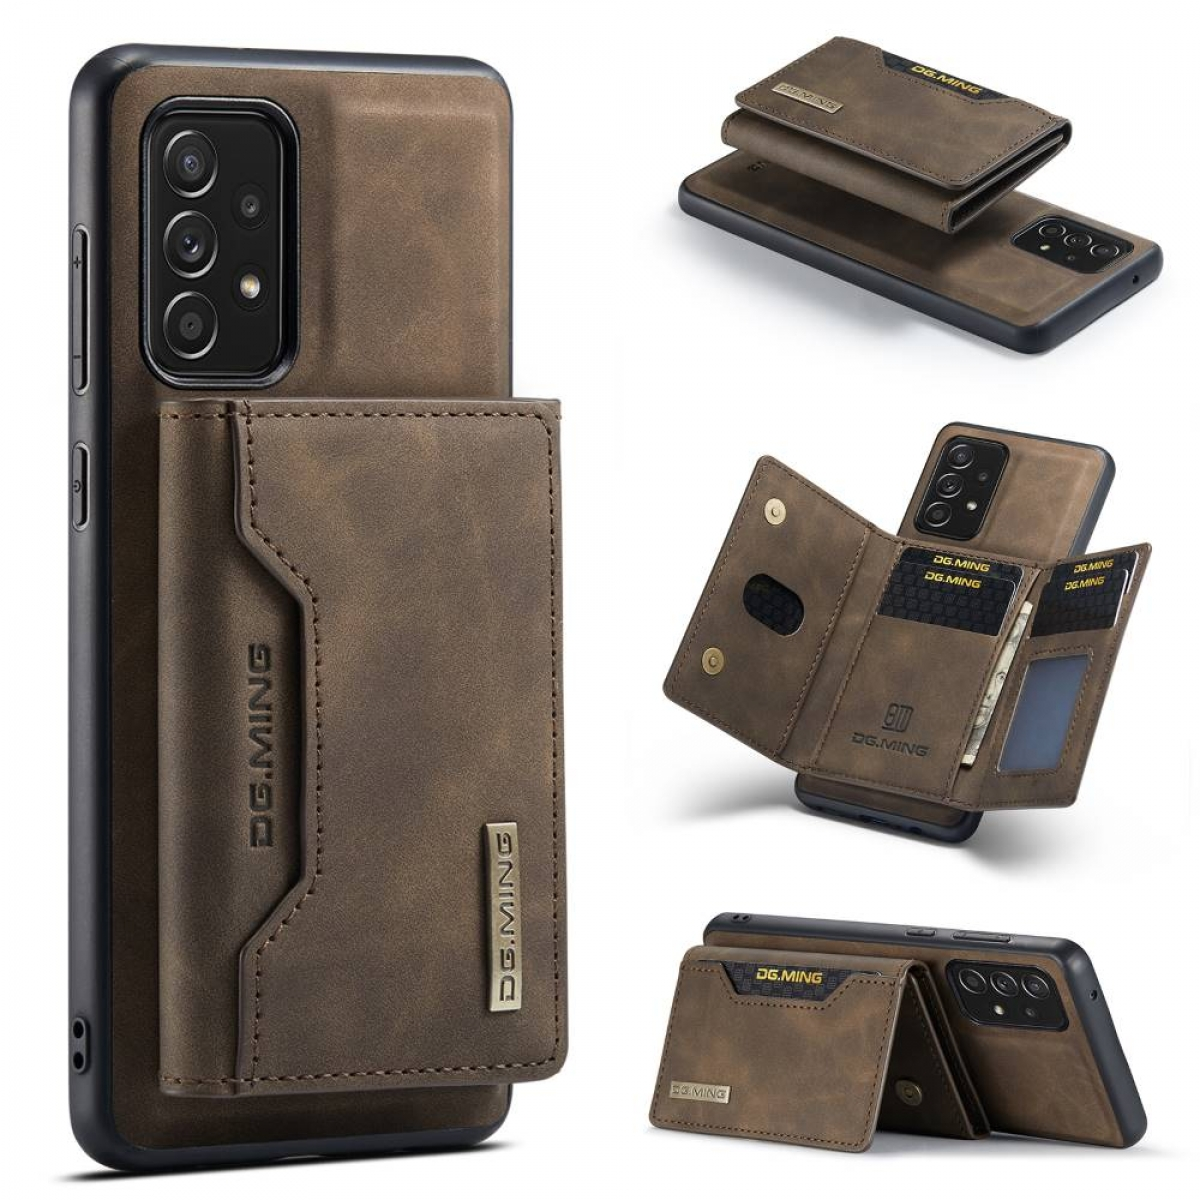 DG MING M2 2in1, Backcover, Coffee Galaxy 5G, A52 Samsung